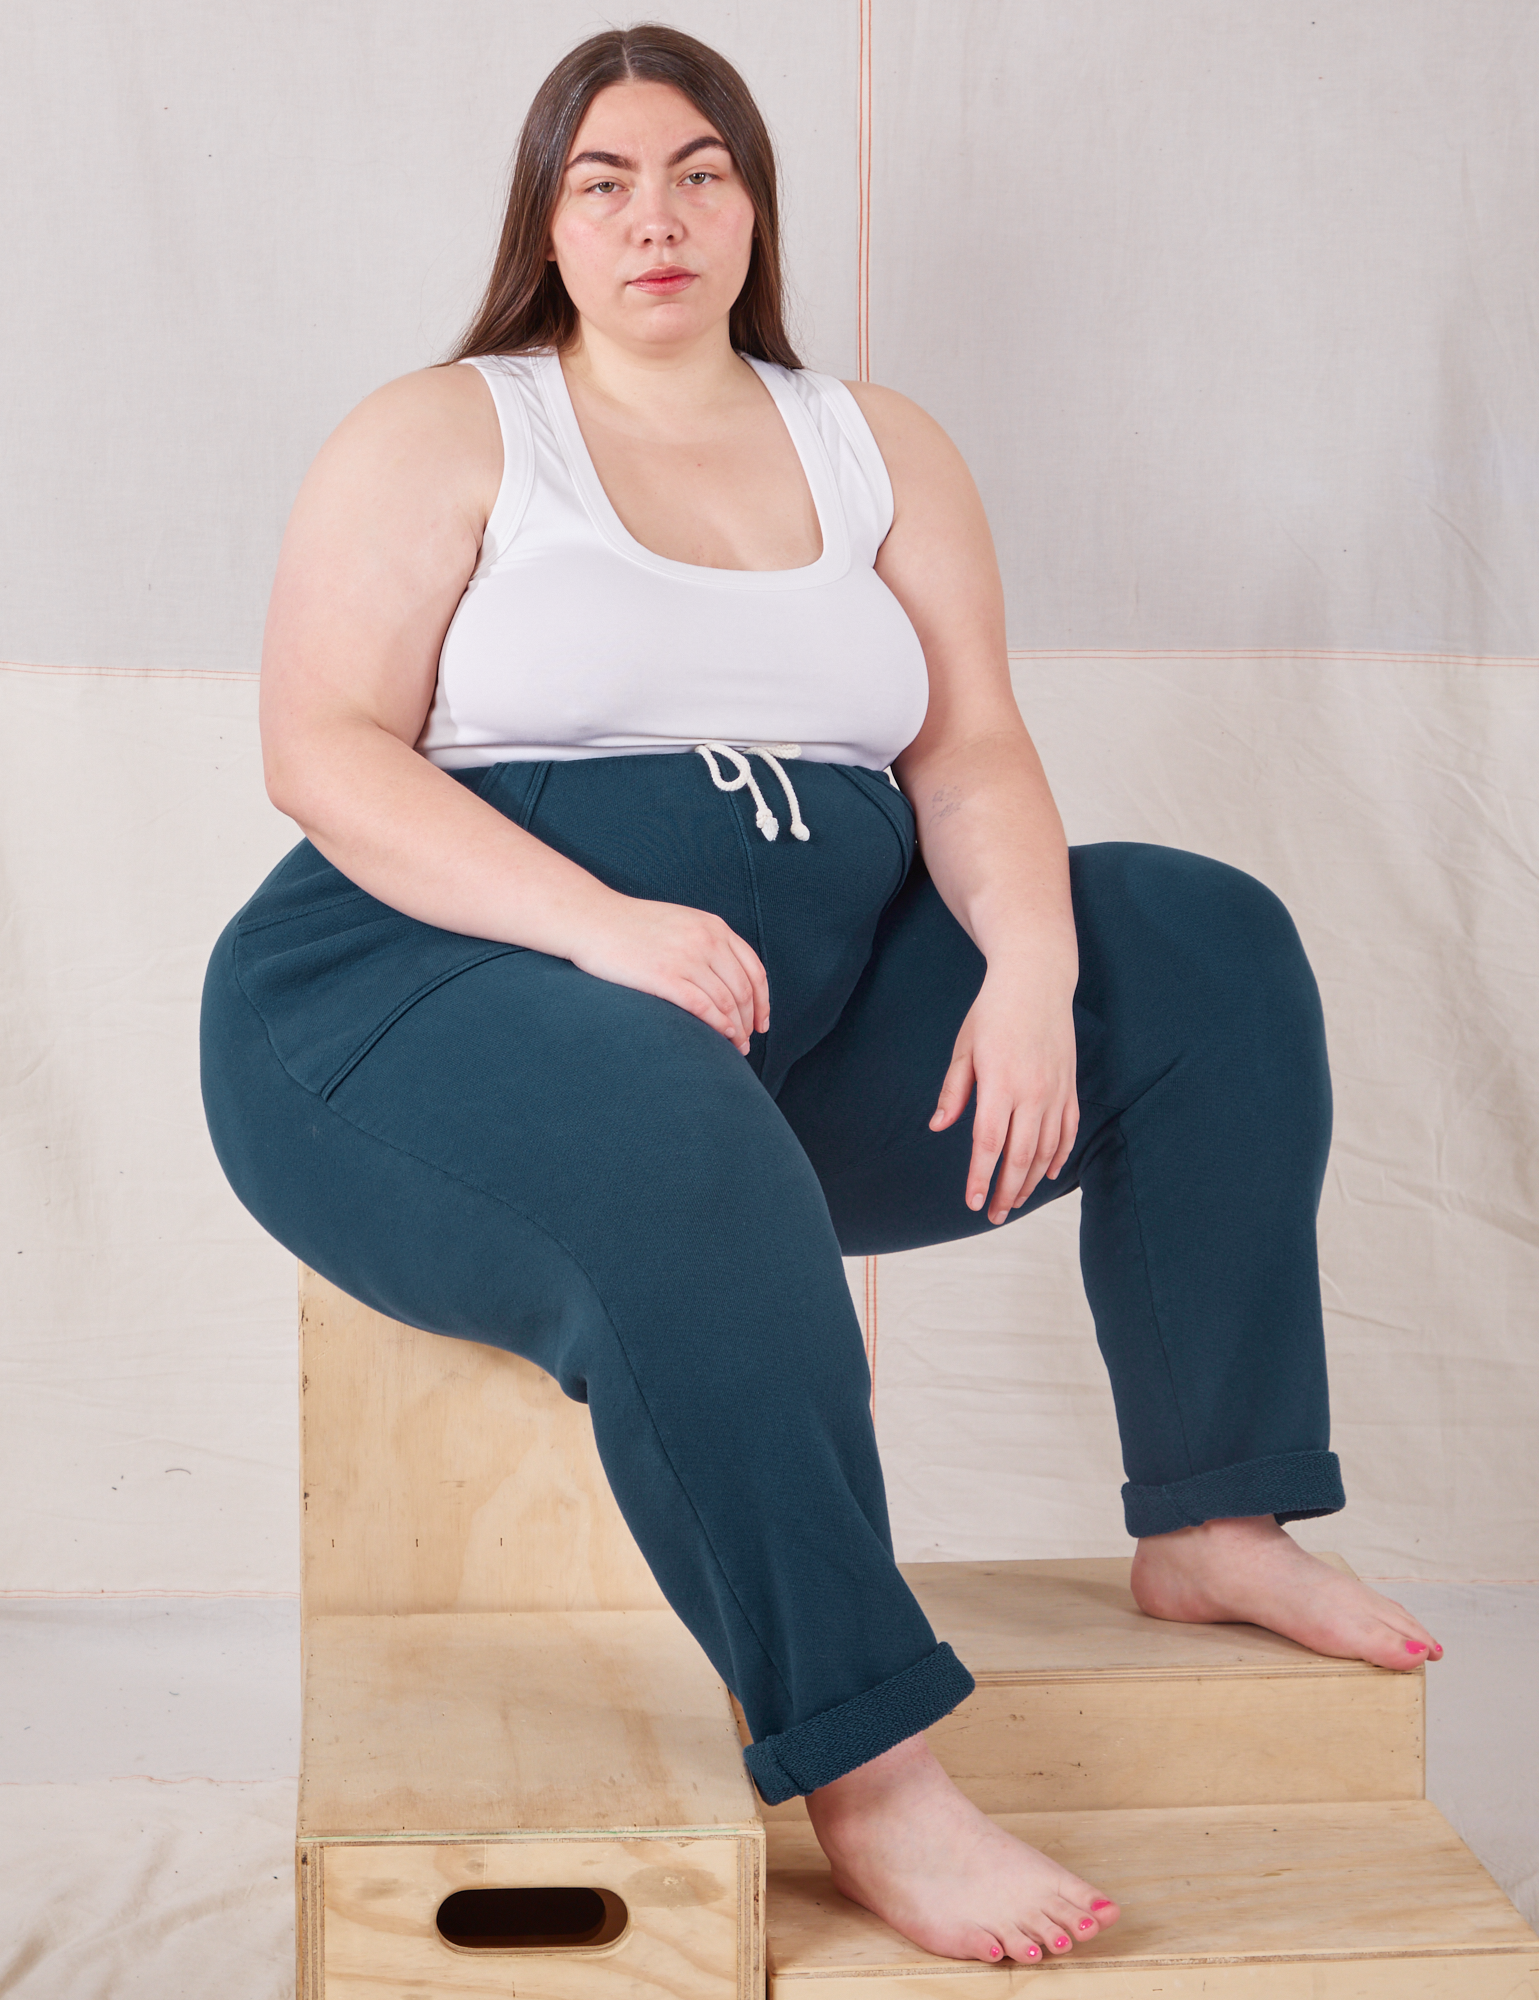 Marielena is wearing Rolled Cuff Sweat Pants in Lagoon and vintage off-white Cropped Tank